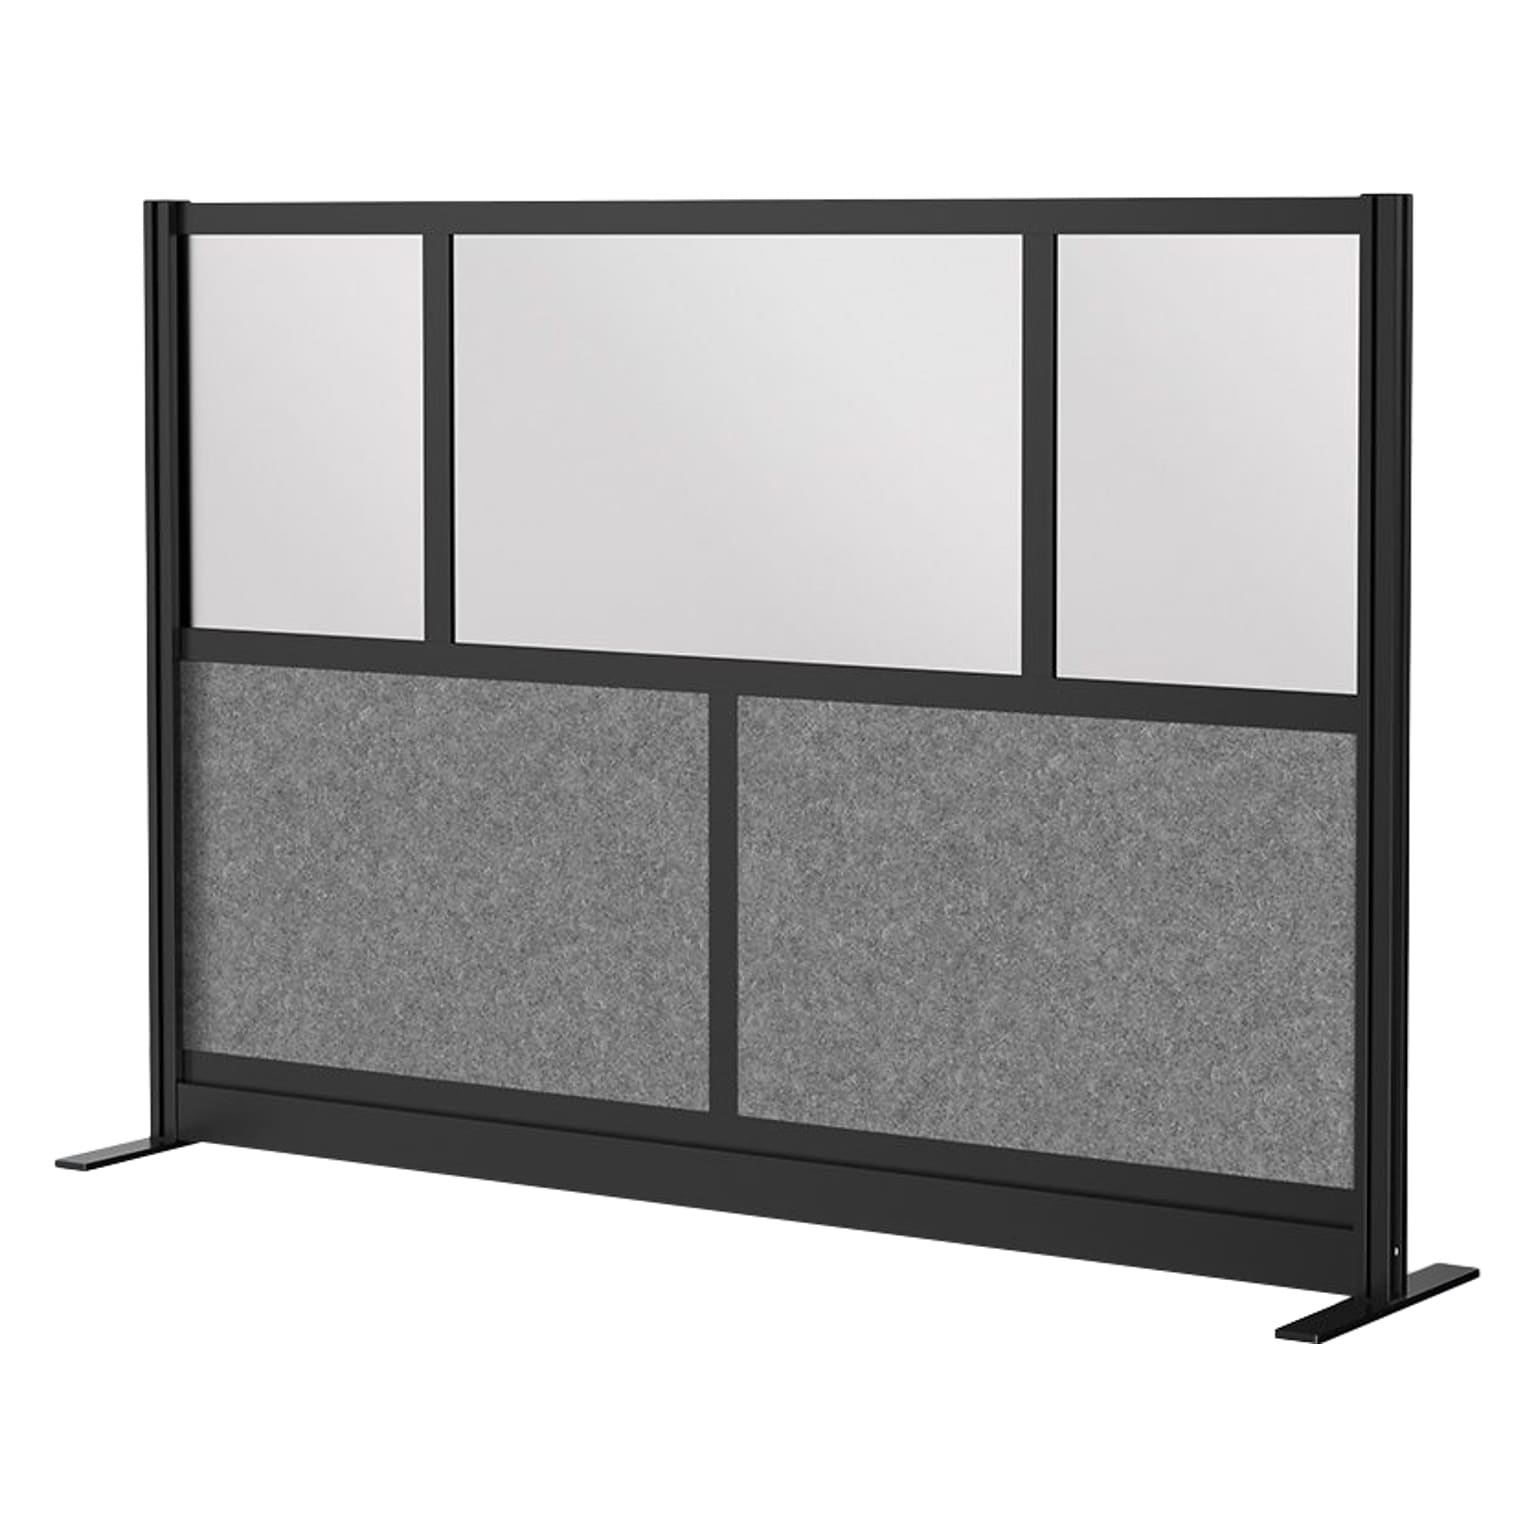 Luxor Expanse Series 5-Panel Freestanding Room Divider System Starter Wall, 48H x 70W, Black/Gray, PET/Acrylic